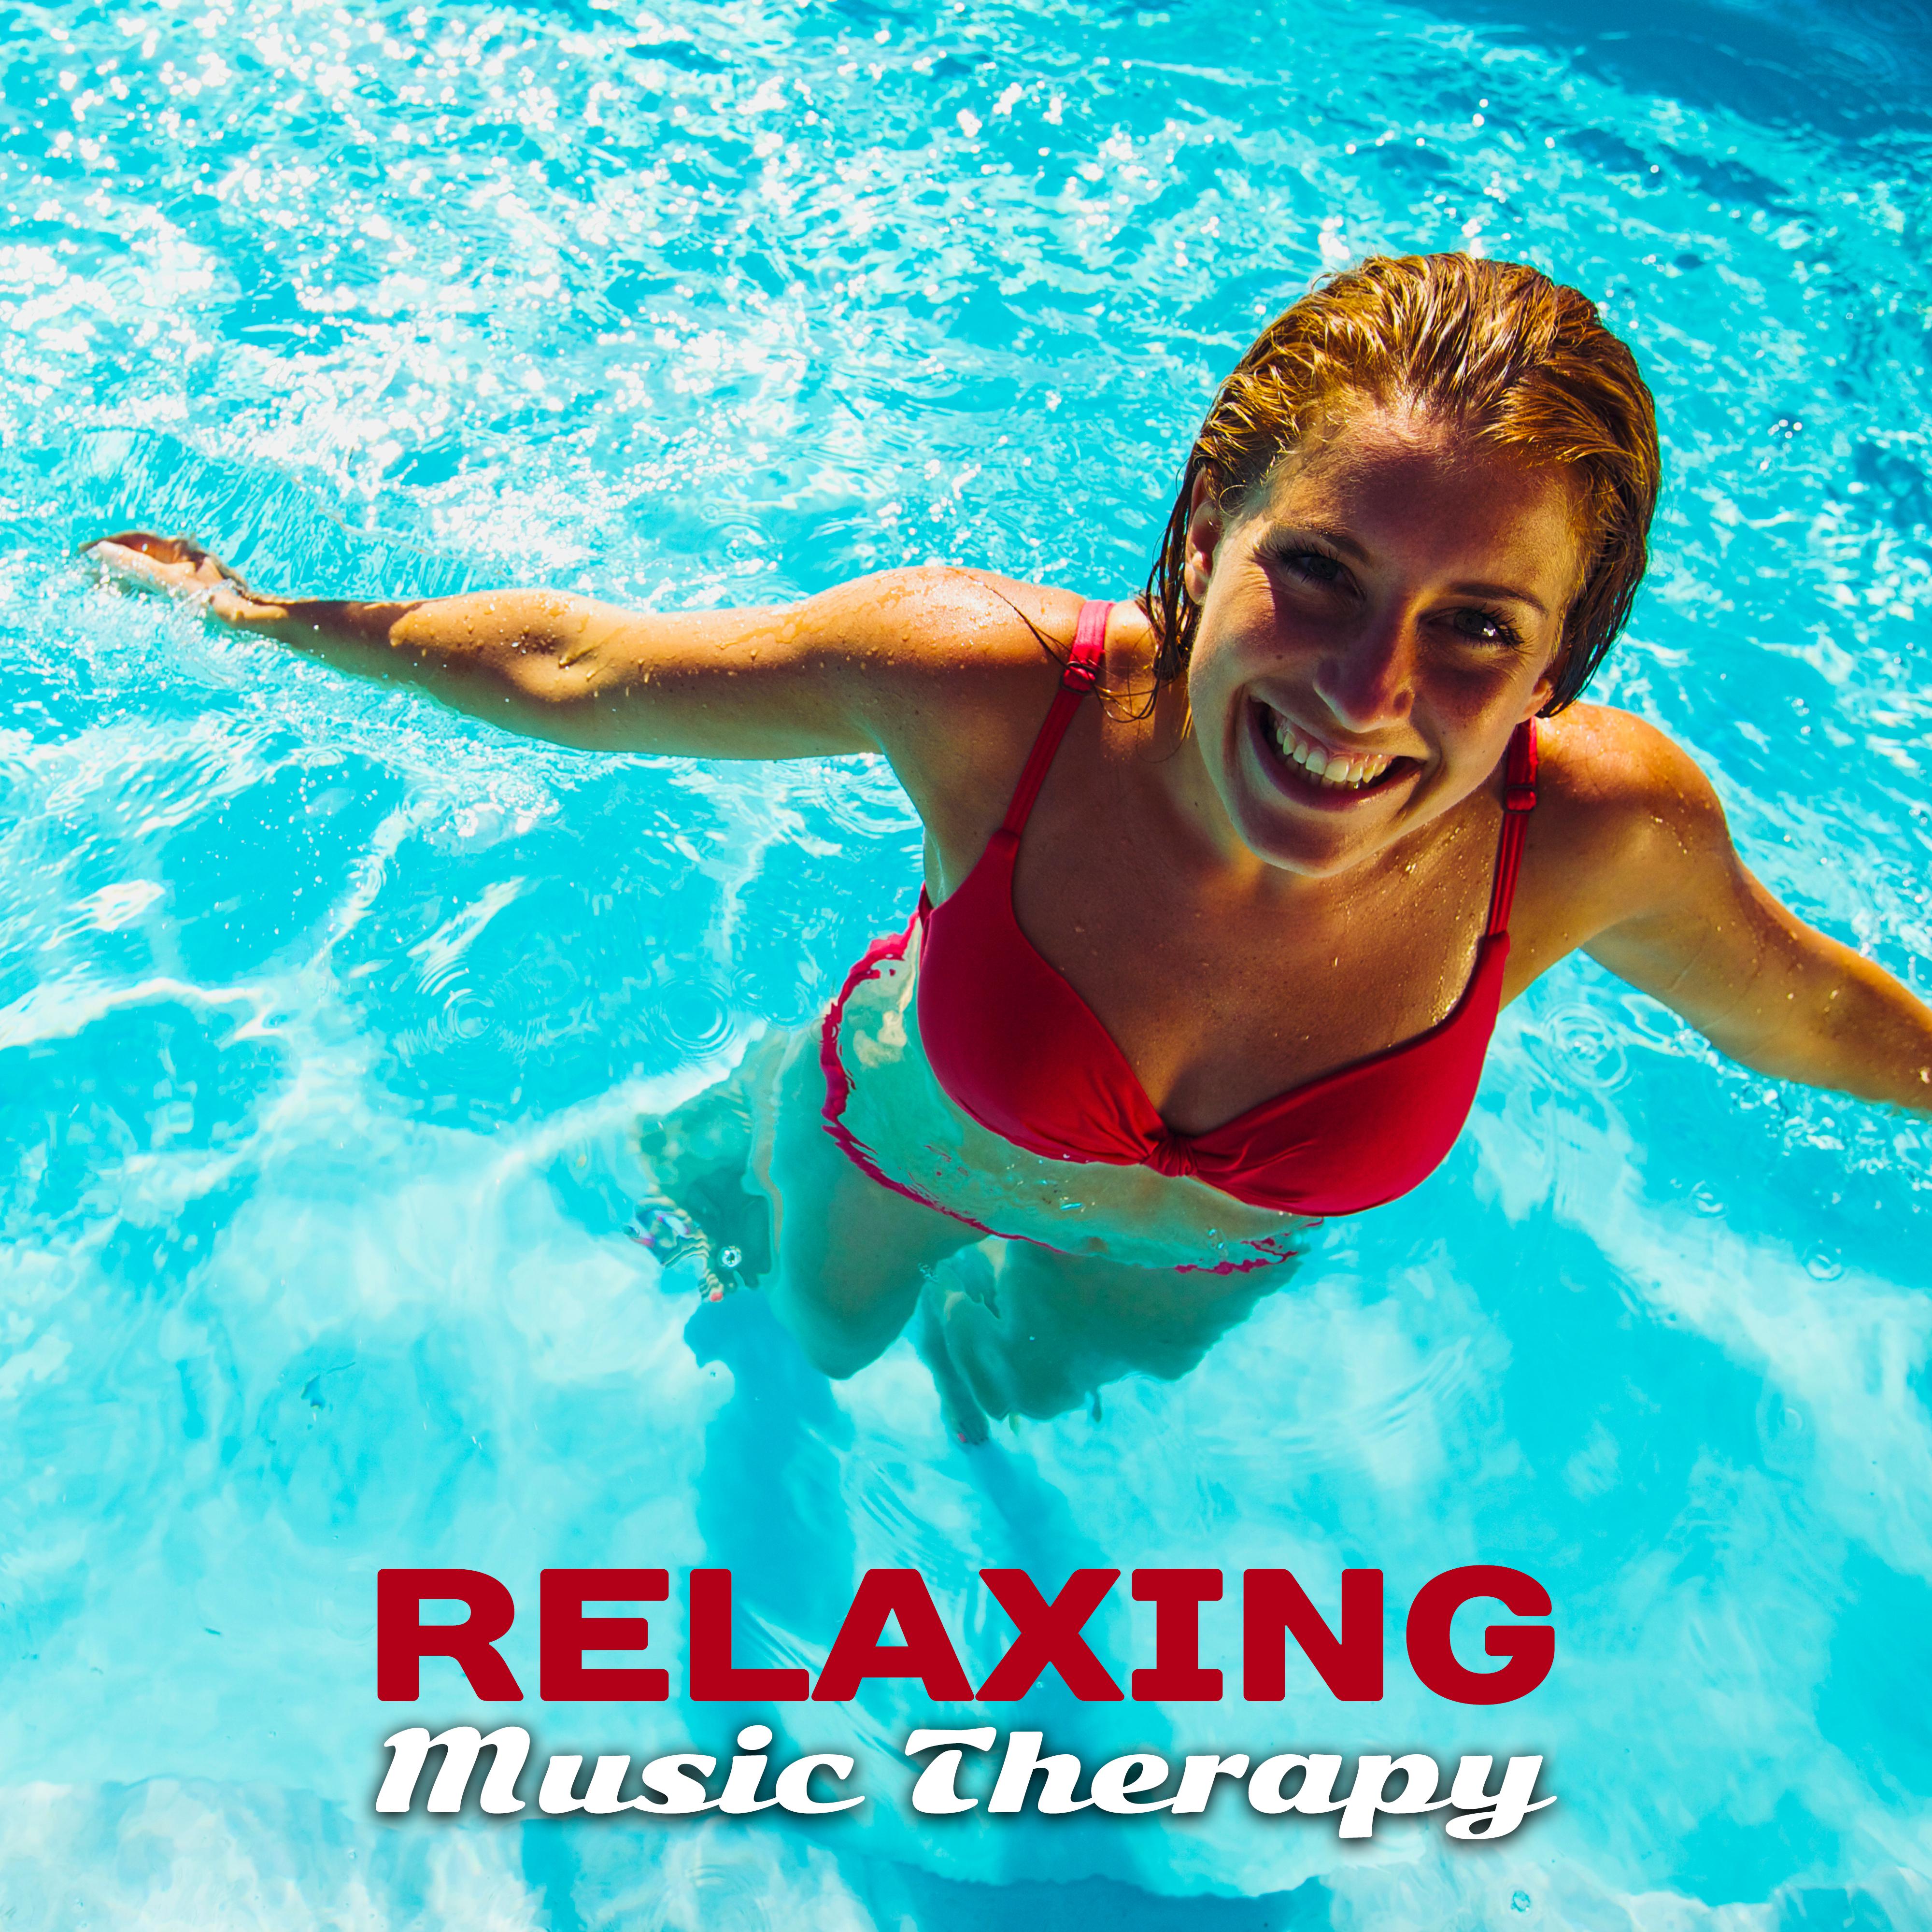 Relaxing Music Therapy – Pure Relaxation, Rest, Nature Sounds, Bliss, Zen, Healing Music